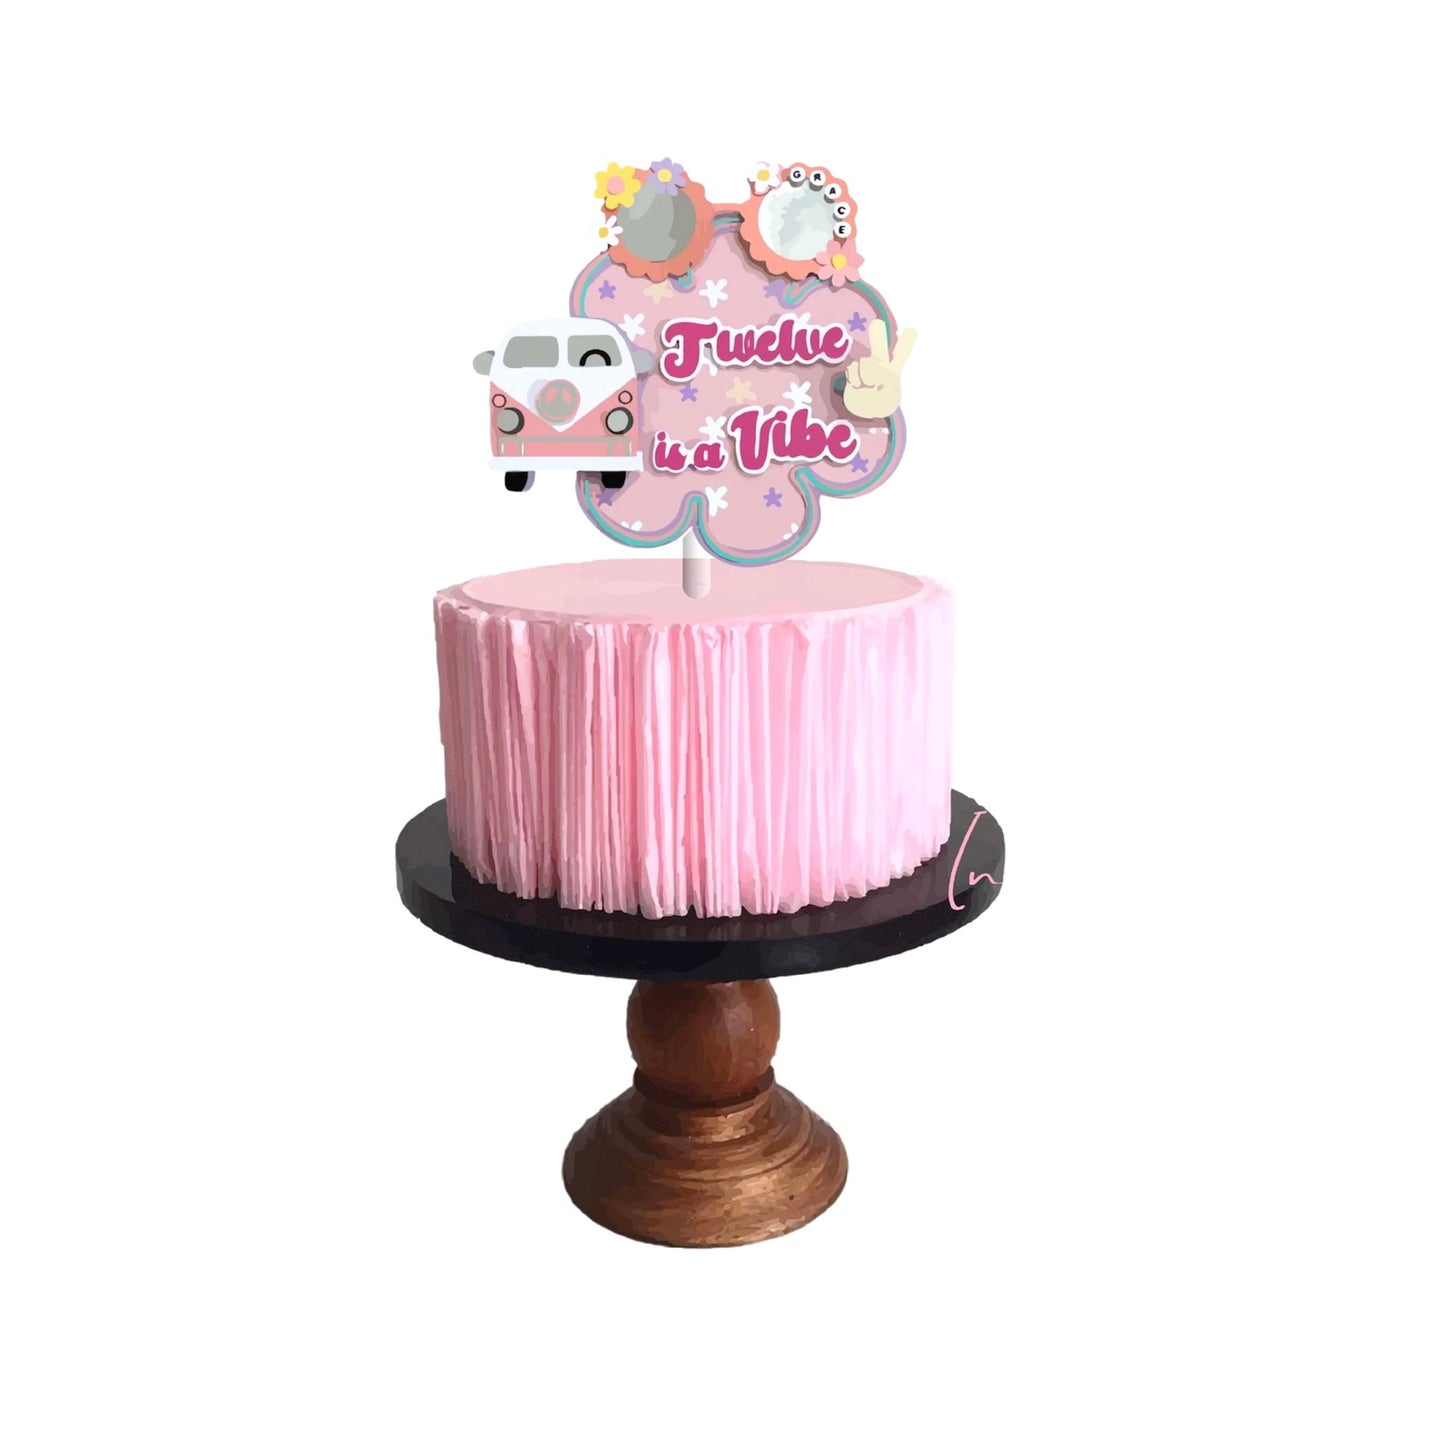 Groovy smash cake personalized topper